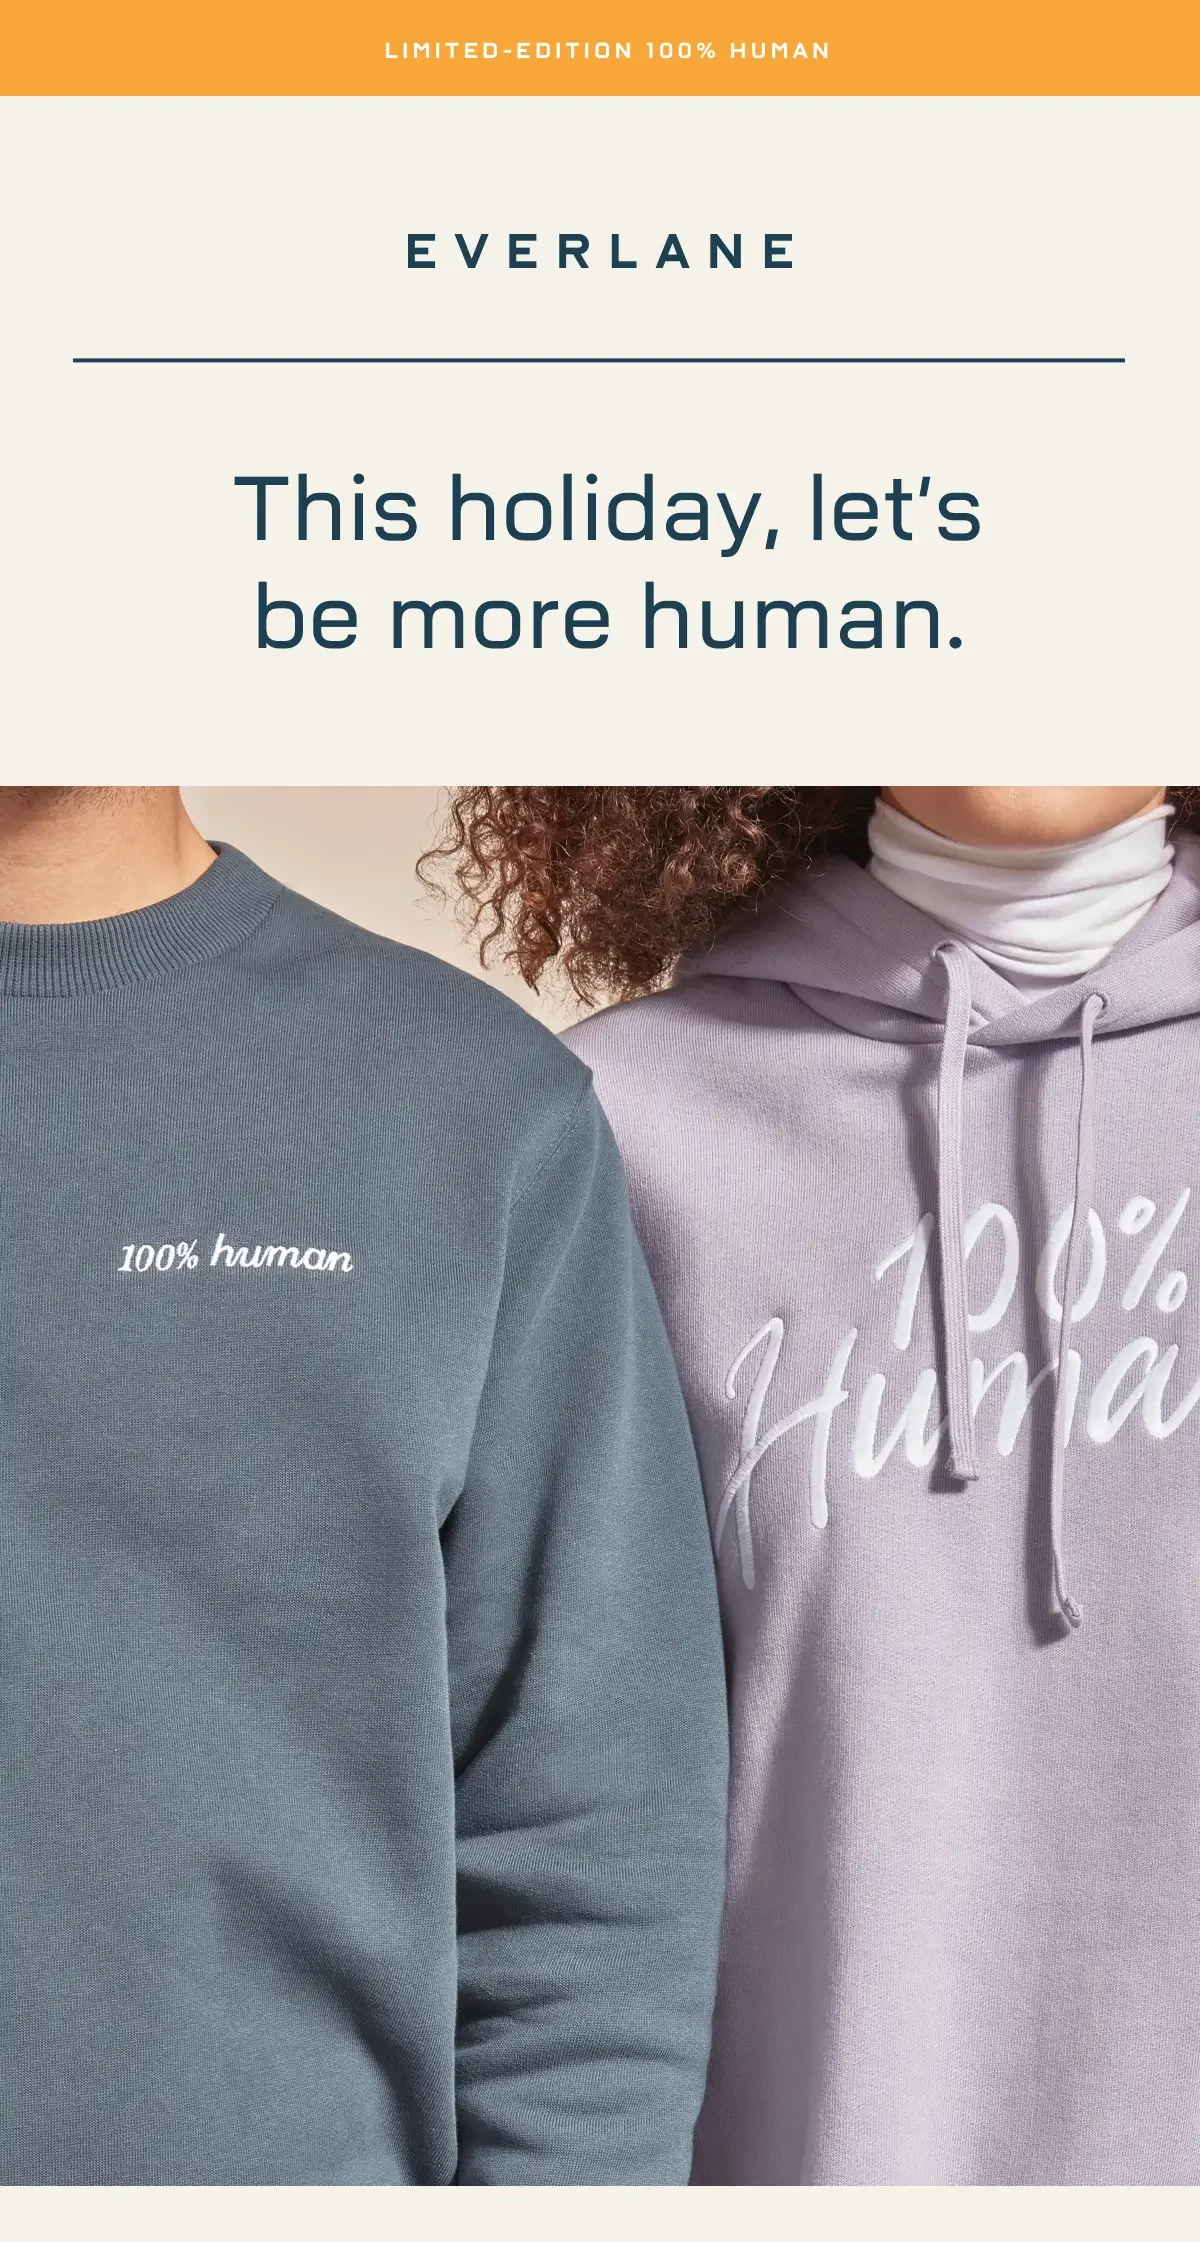 This holiday, let's be more human.